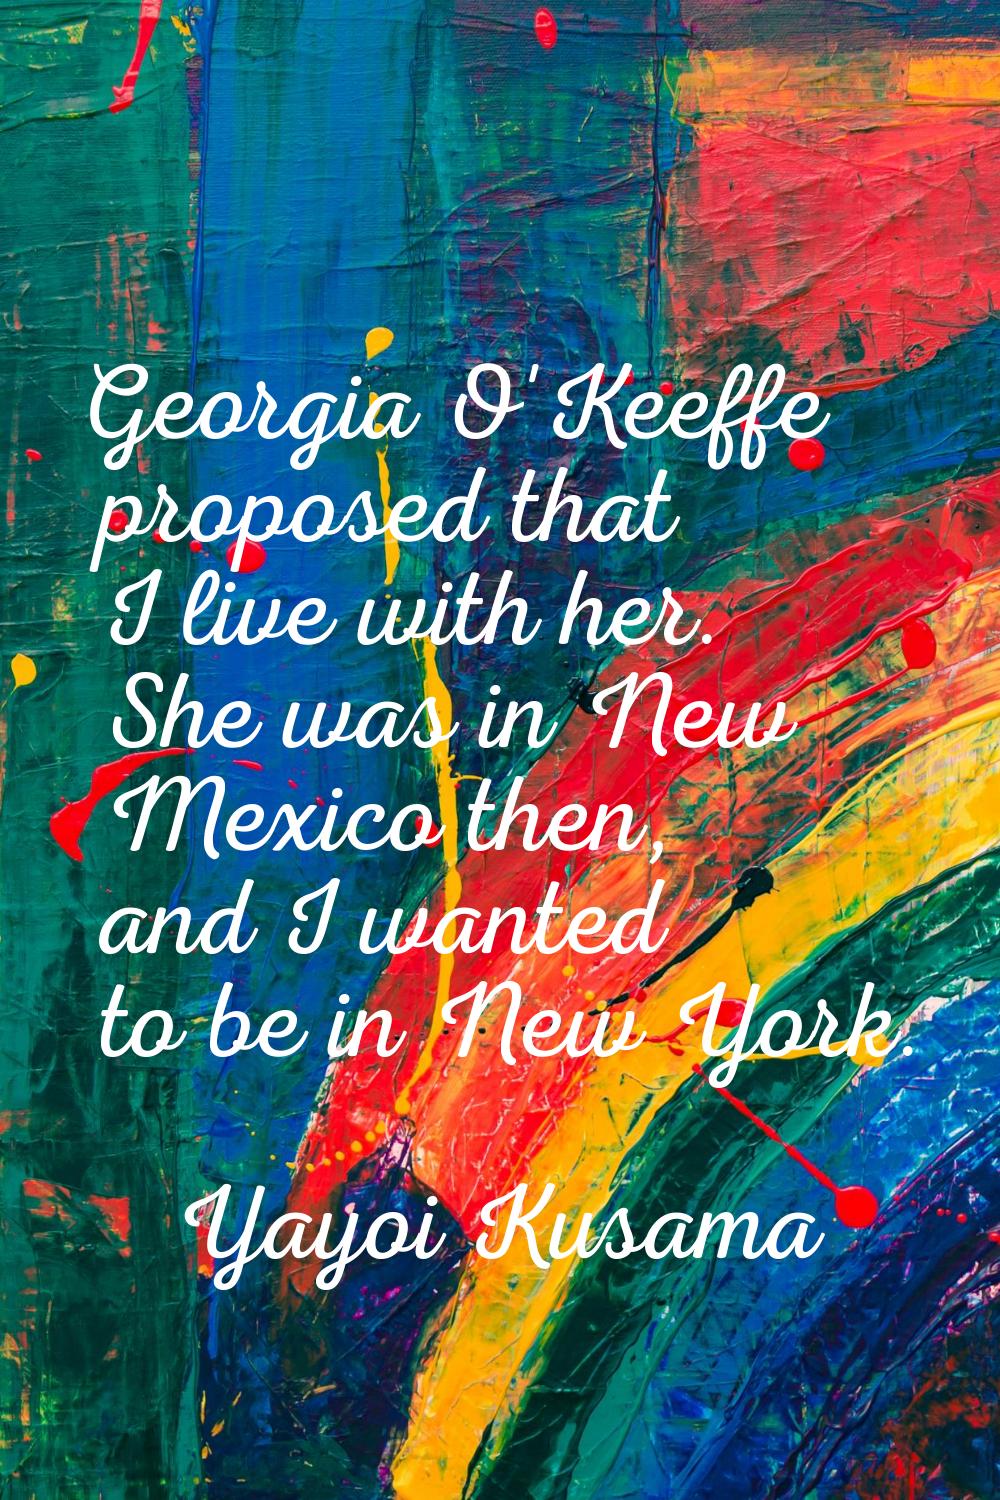 Georgia O'Keeffe proposed that I live with her. She was in New Mexico then, and I wanted to be in N